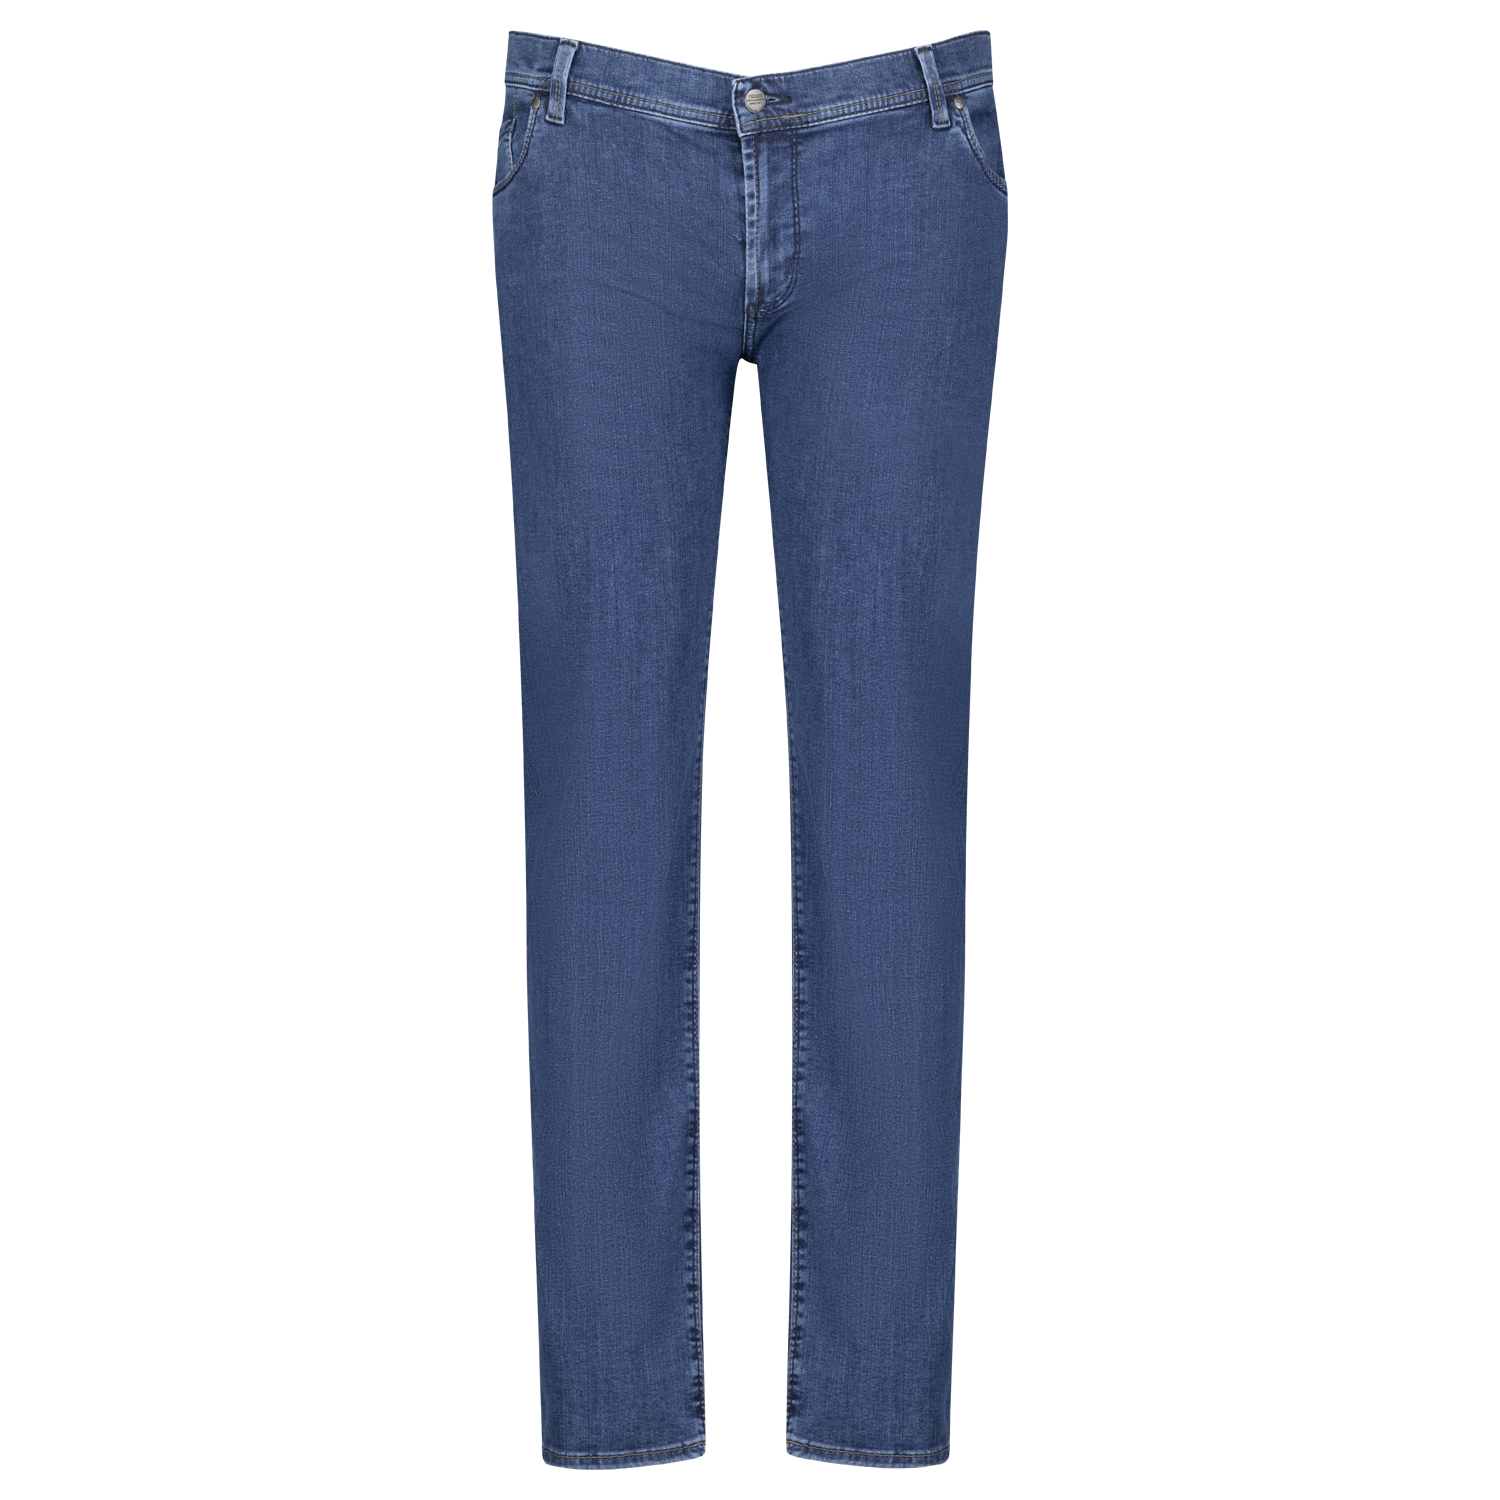 5-Pocket Jeans homme avec stretch "Thomas" blue stonewash by Pioneer grandes tailles (Taille basse): 28 - 40